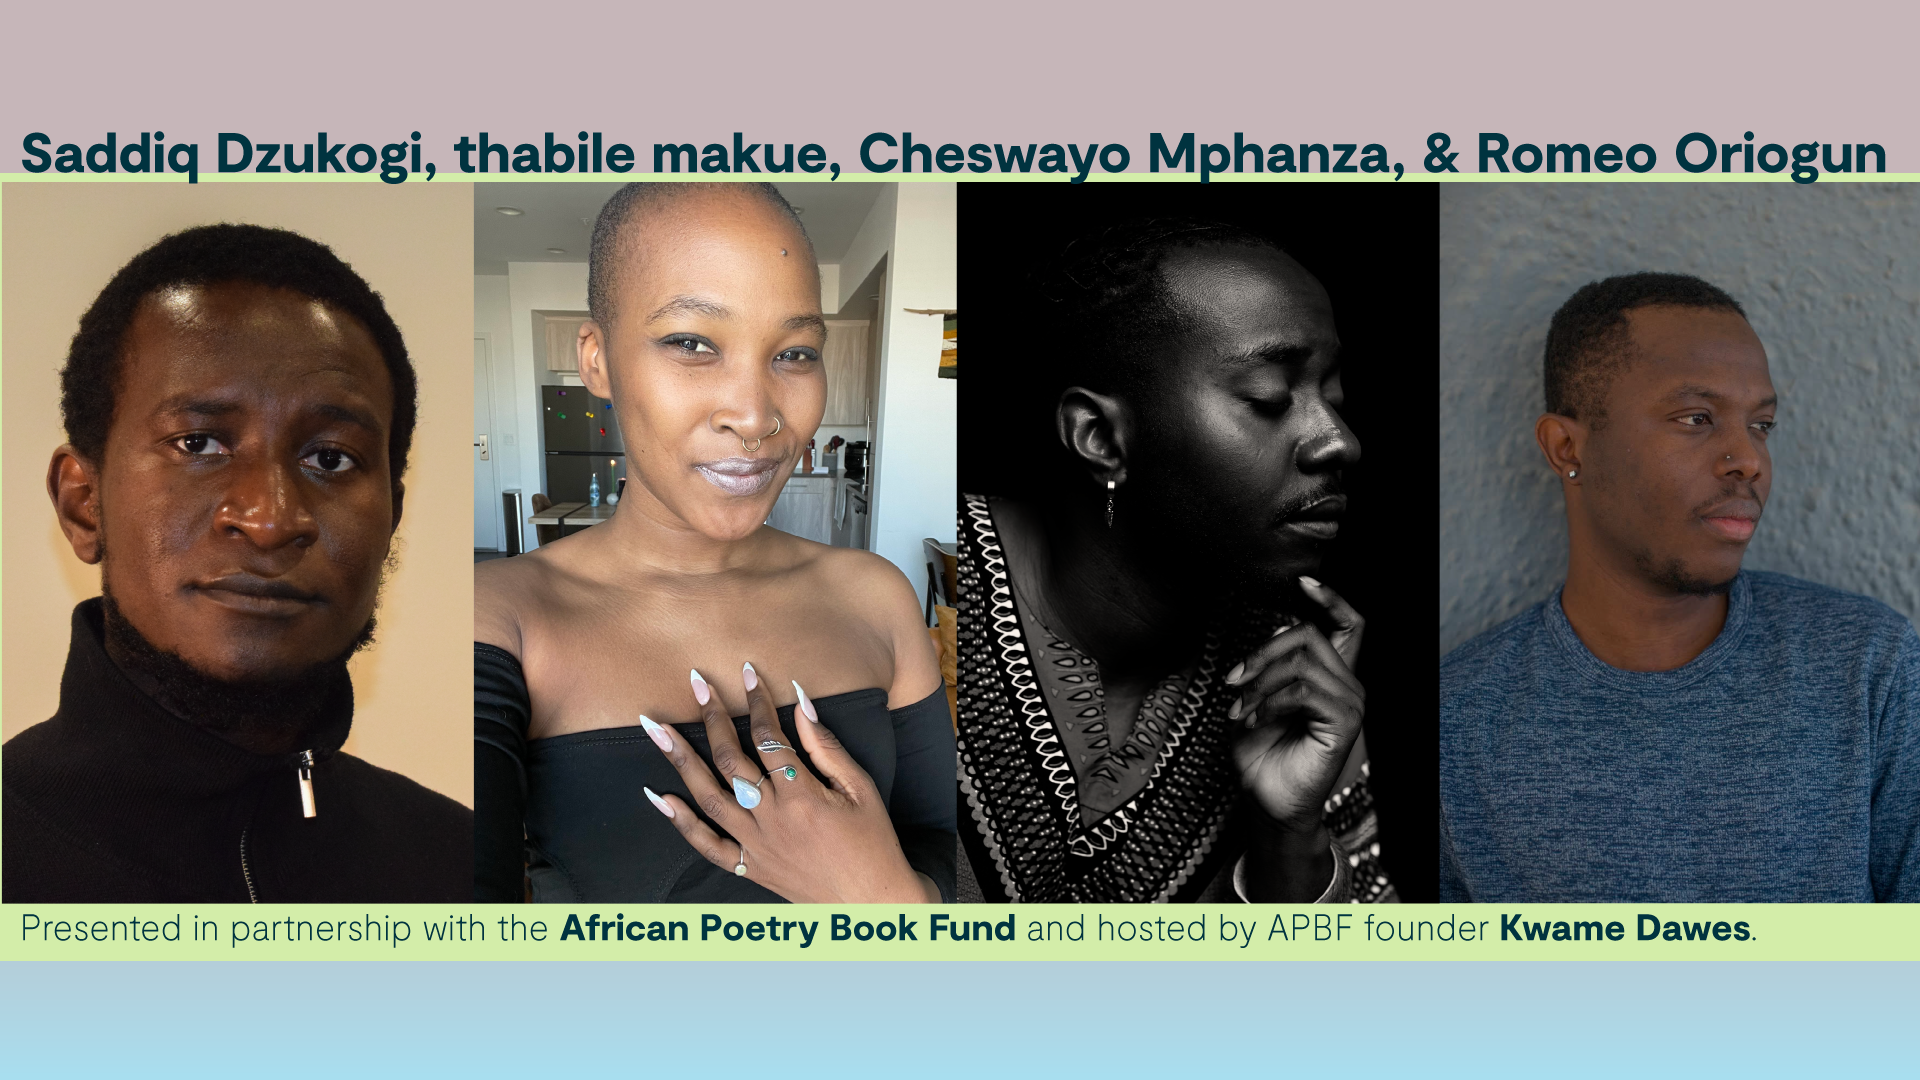 Text displayed "Saddiq Dzukogi, thabile makue, Cheswayo Mphanza, & Romeo Oriogun. Presented in partnership with the African Poetry Book Fund and hosted by APBF founder Kwame Dawes." Centered are photos of each Black poet, in order of text. Light blue, green, and pinky-taupe background